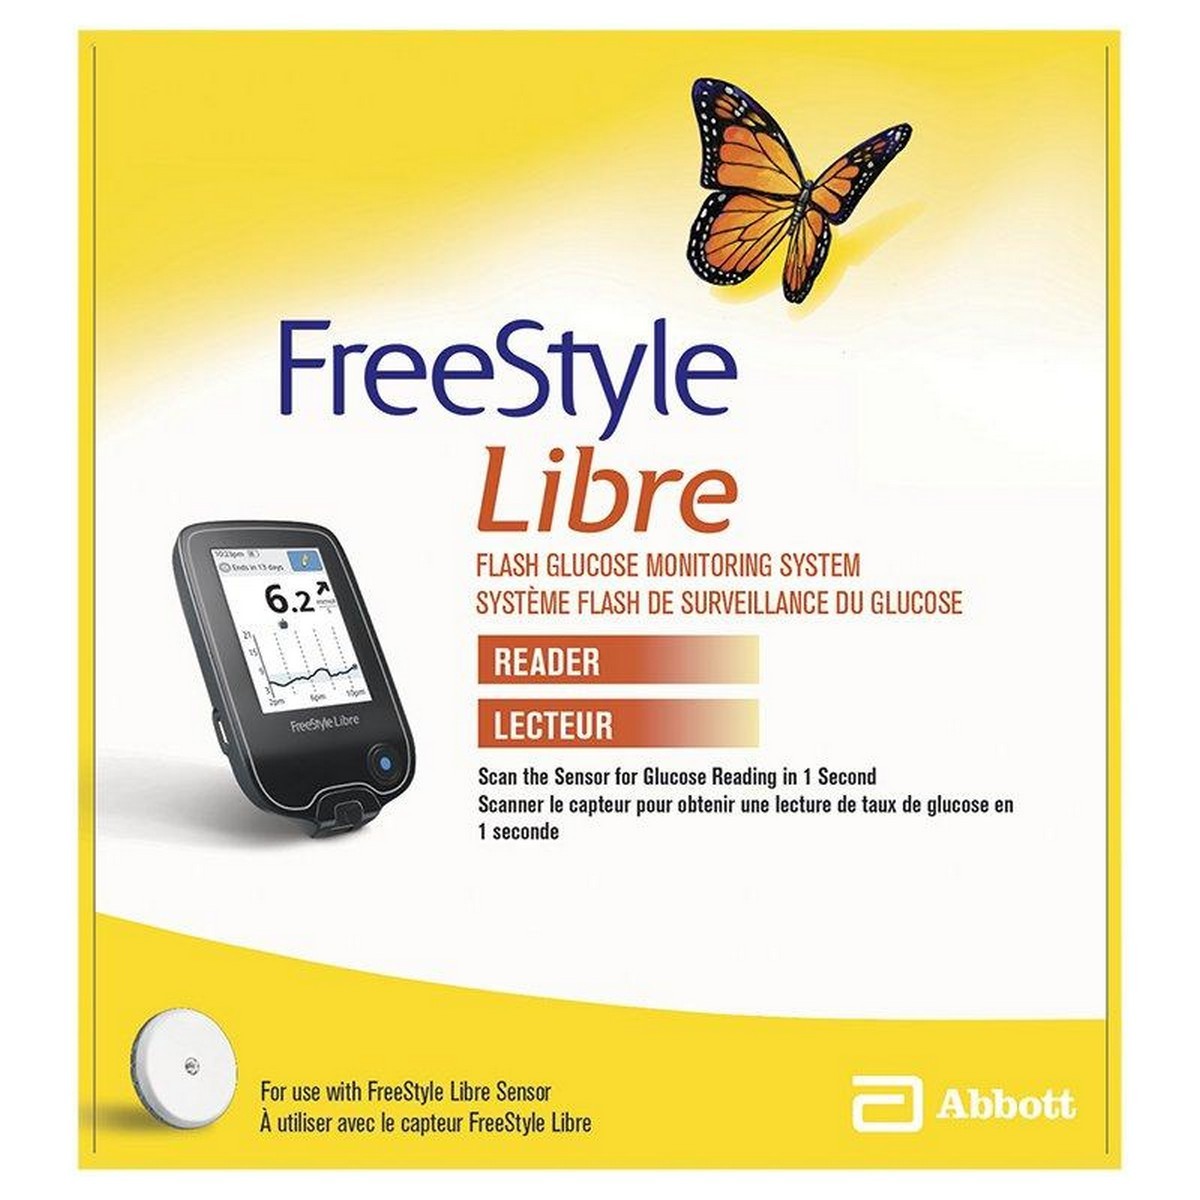 Freestyle Libre Glucose Monitoring System